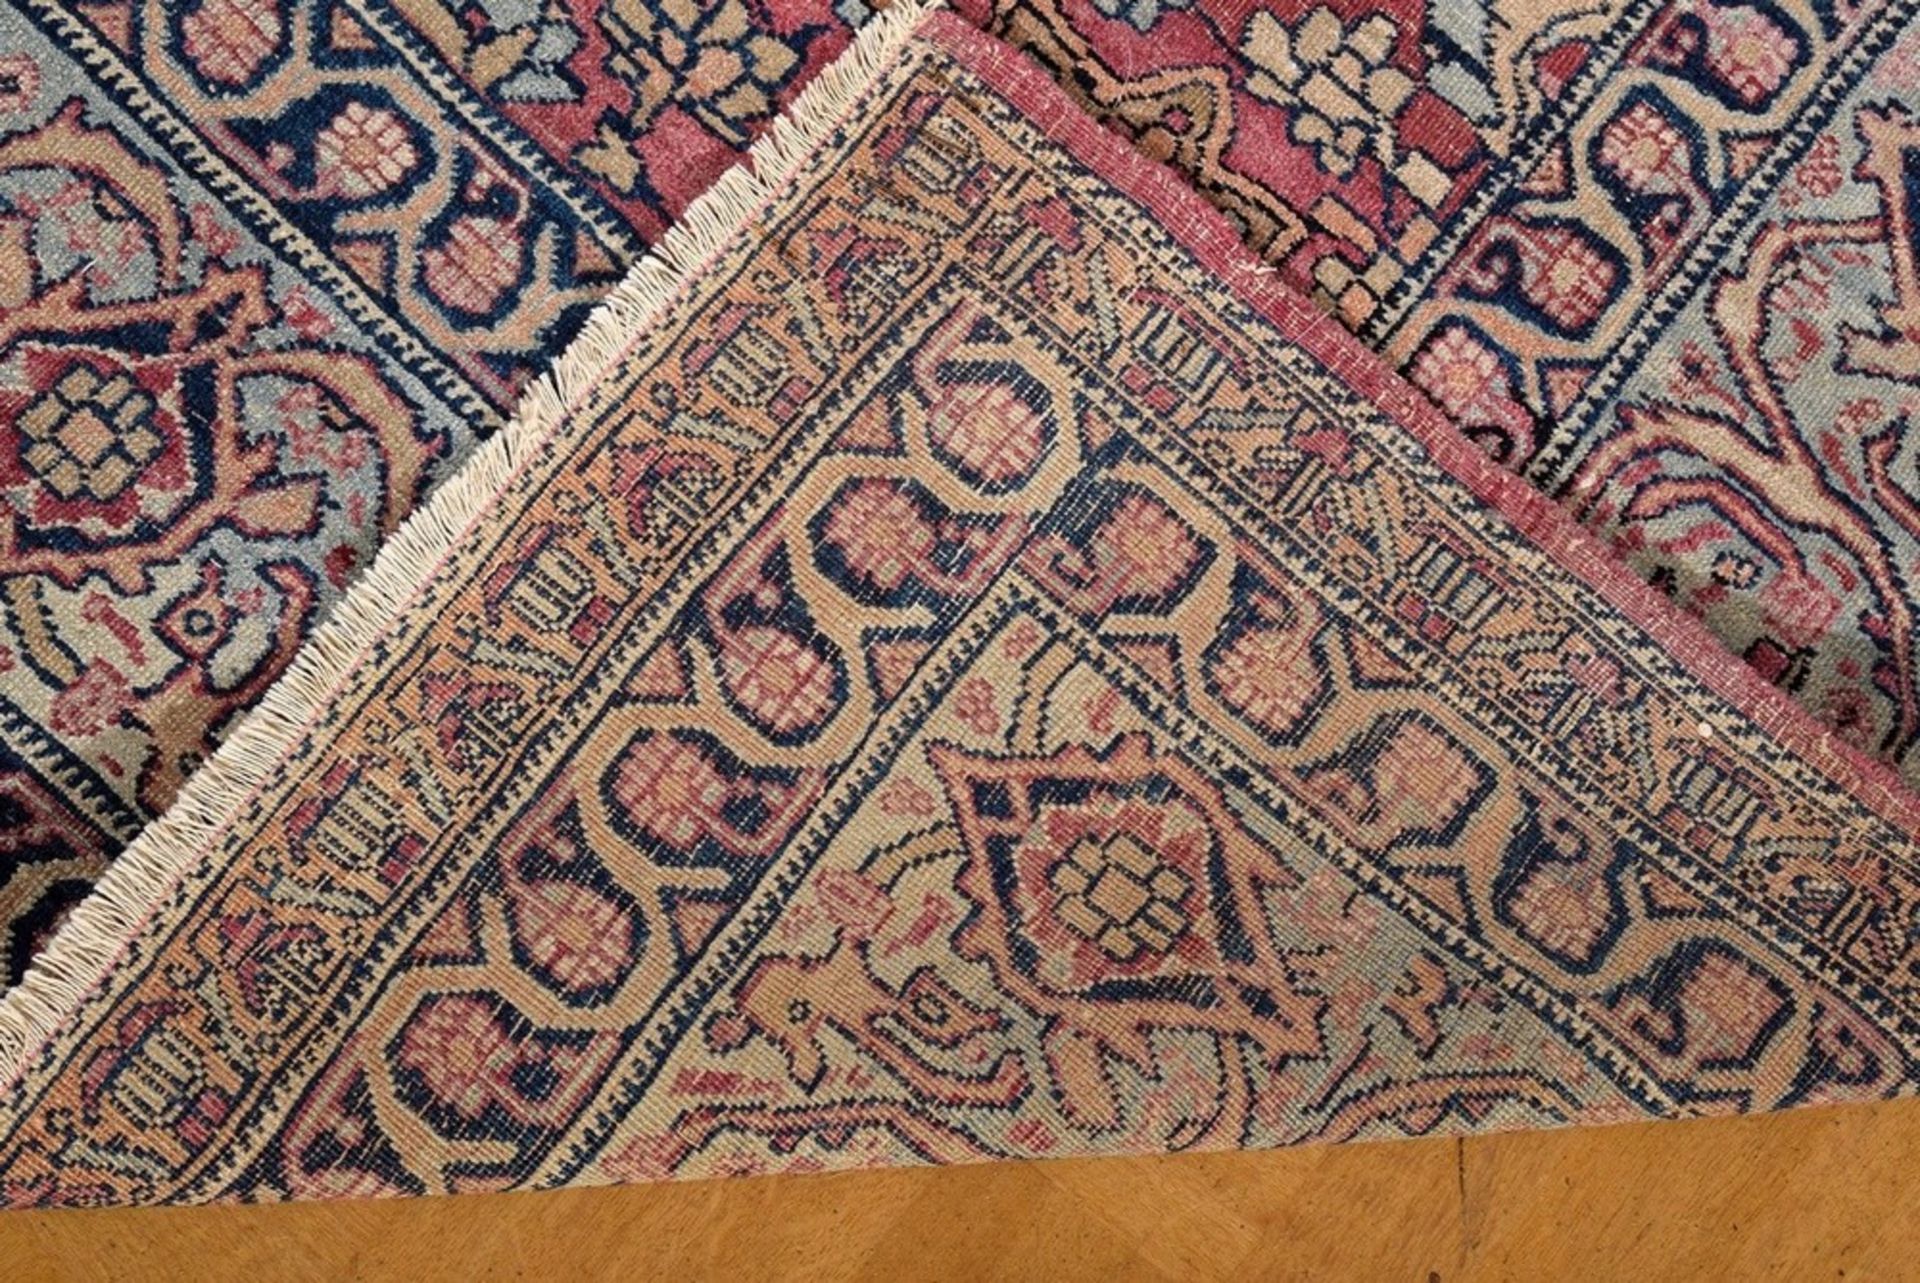 A very finely woven carpet from Tehran, with a densely closed velvet-like pile in pastel colours, d - Image 6 of 7